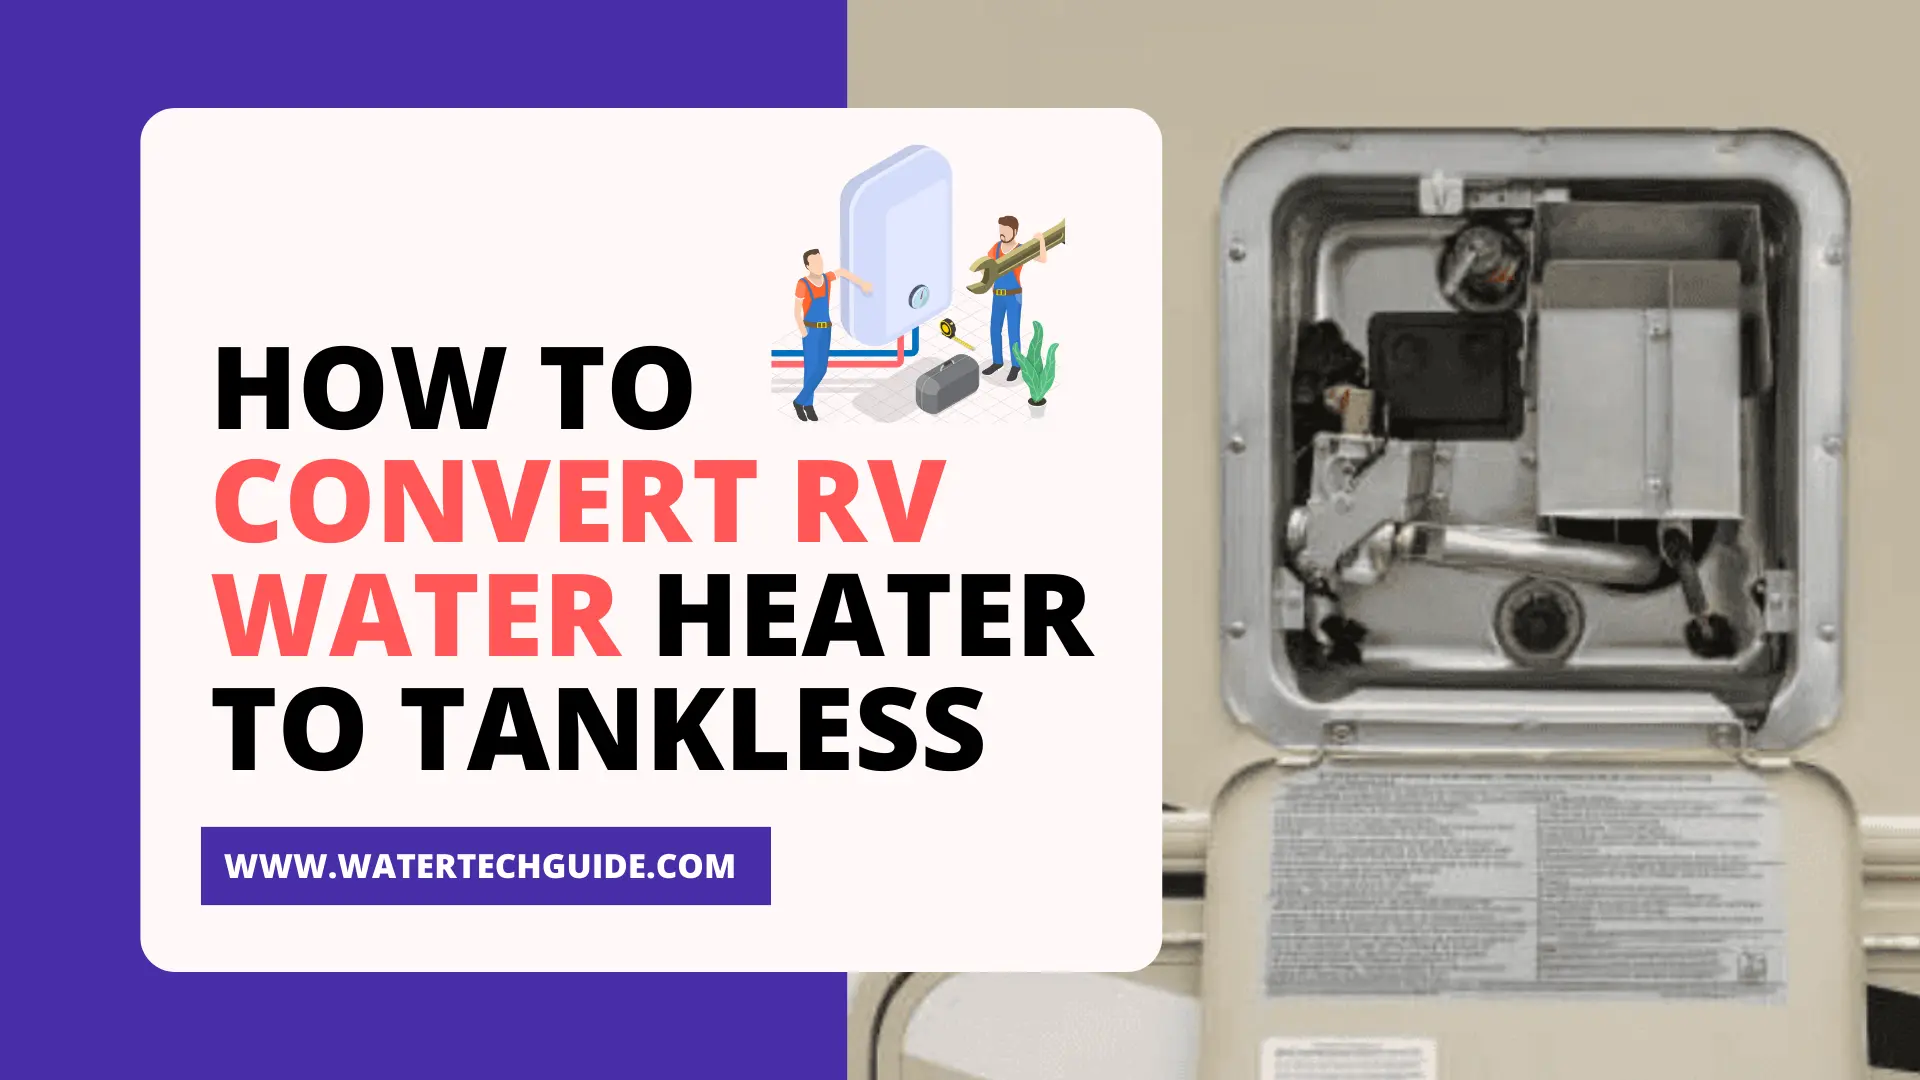 How to Convert RV Water Heater to Tankless